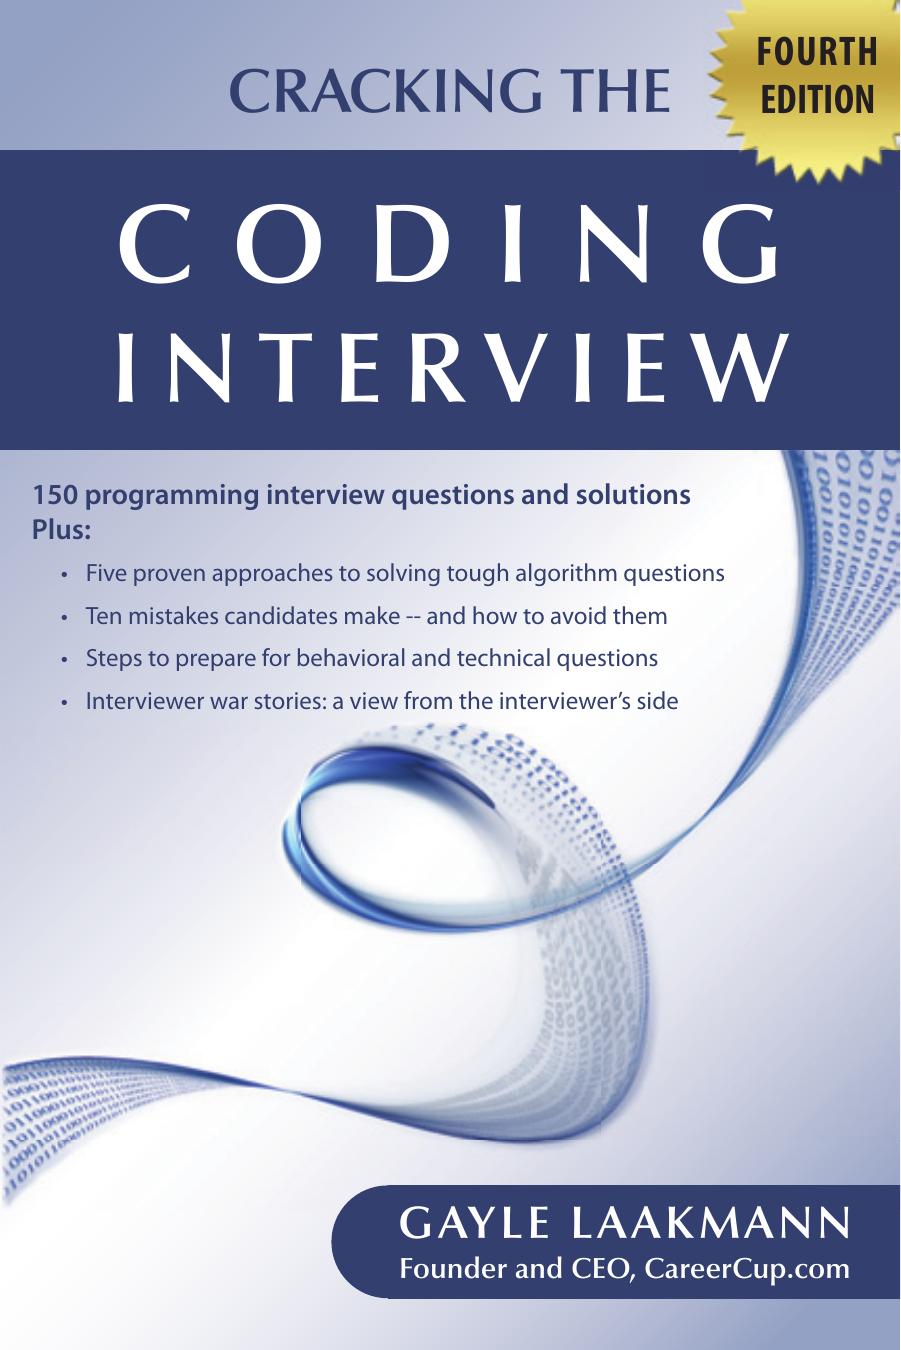 Cracking the Coding Interview: 150 Programming Interview Questions and Solutions by Gayle Laakmann